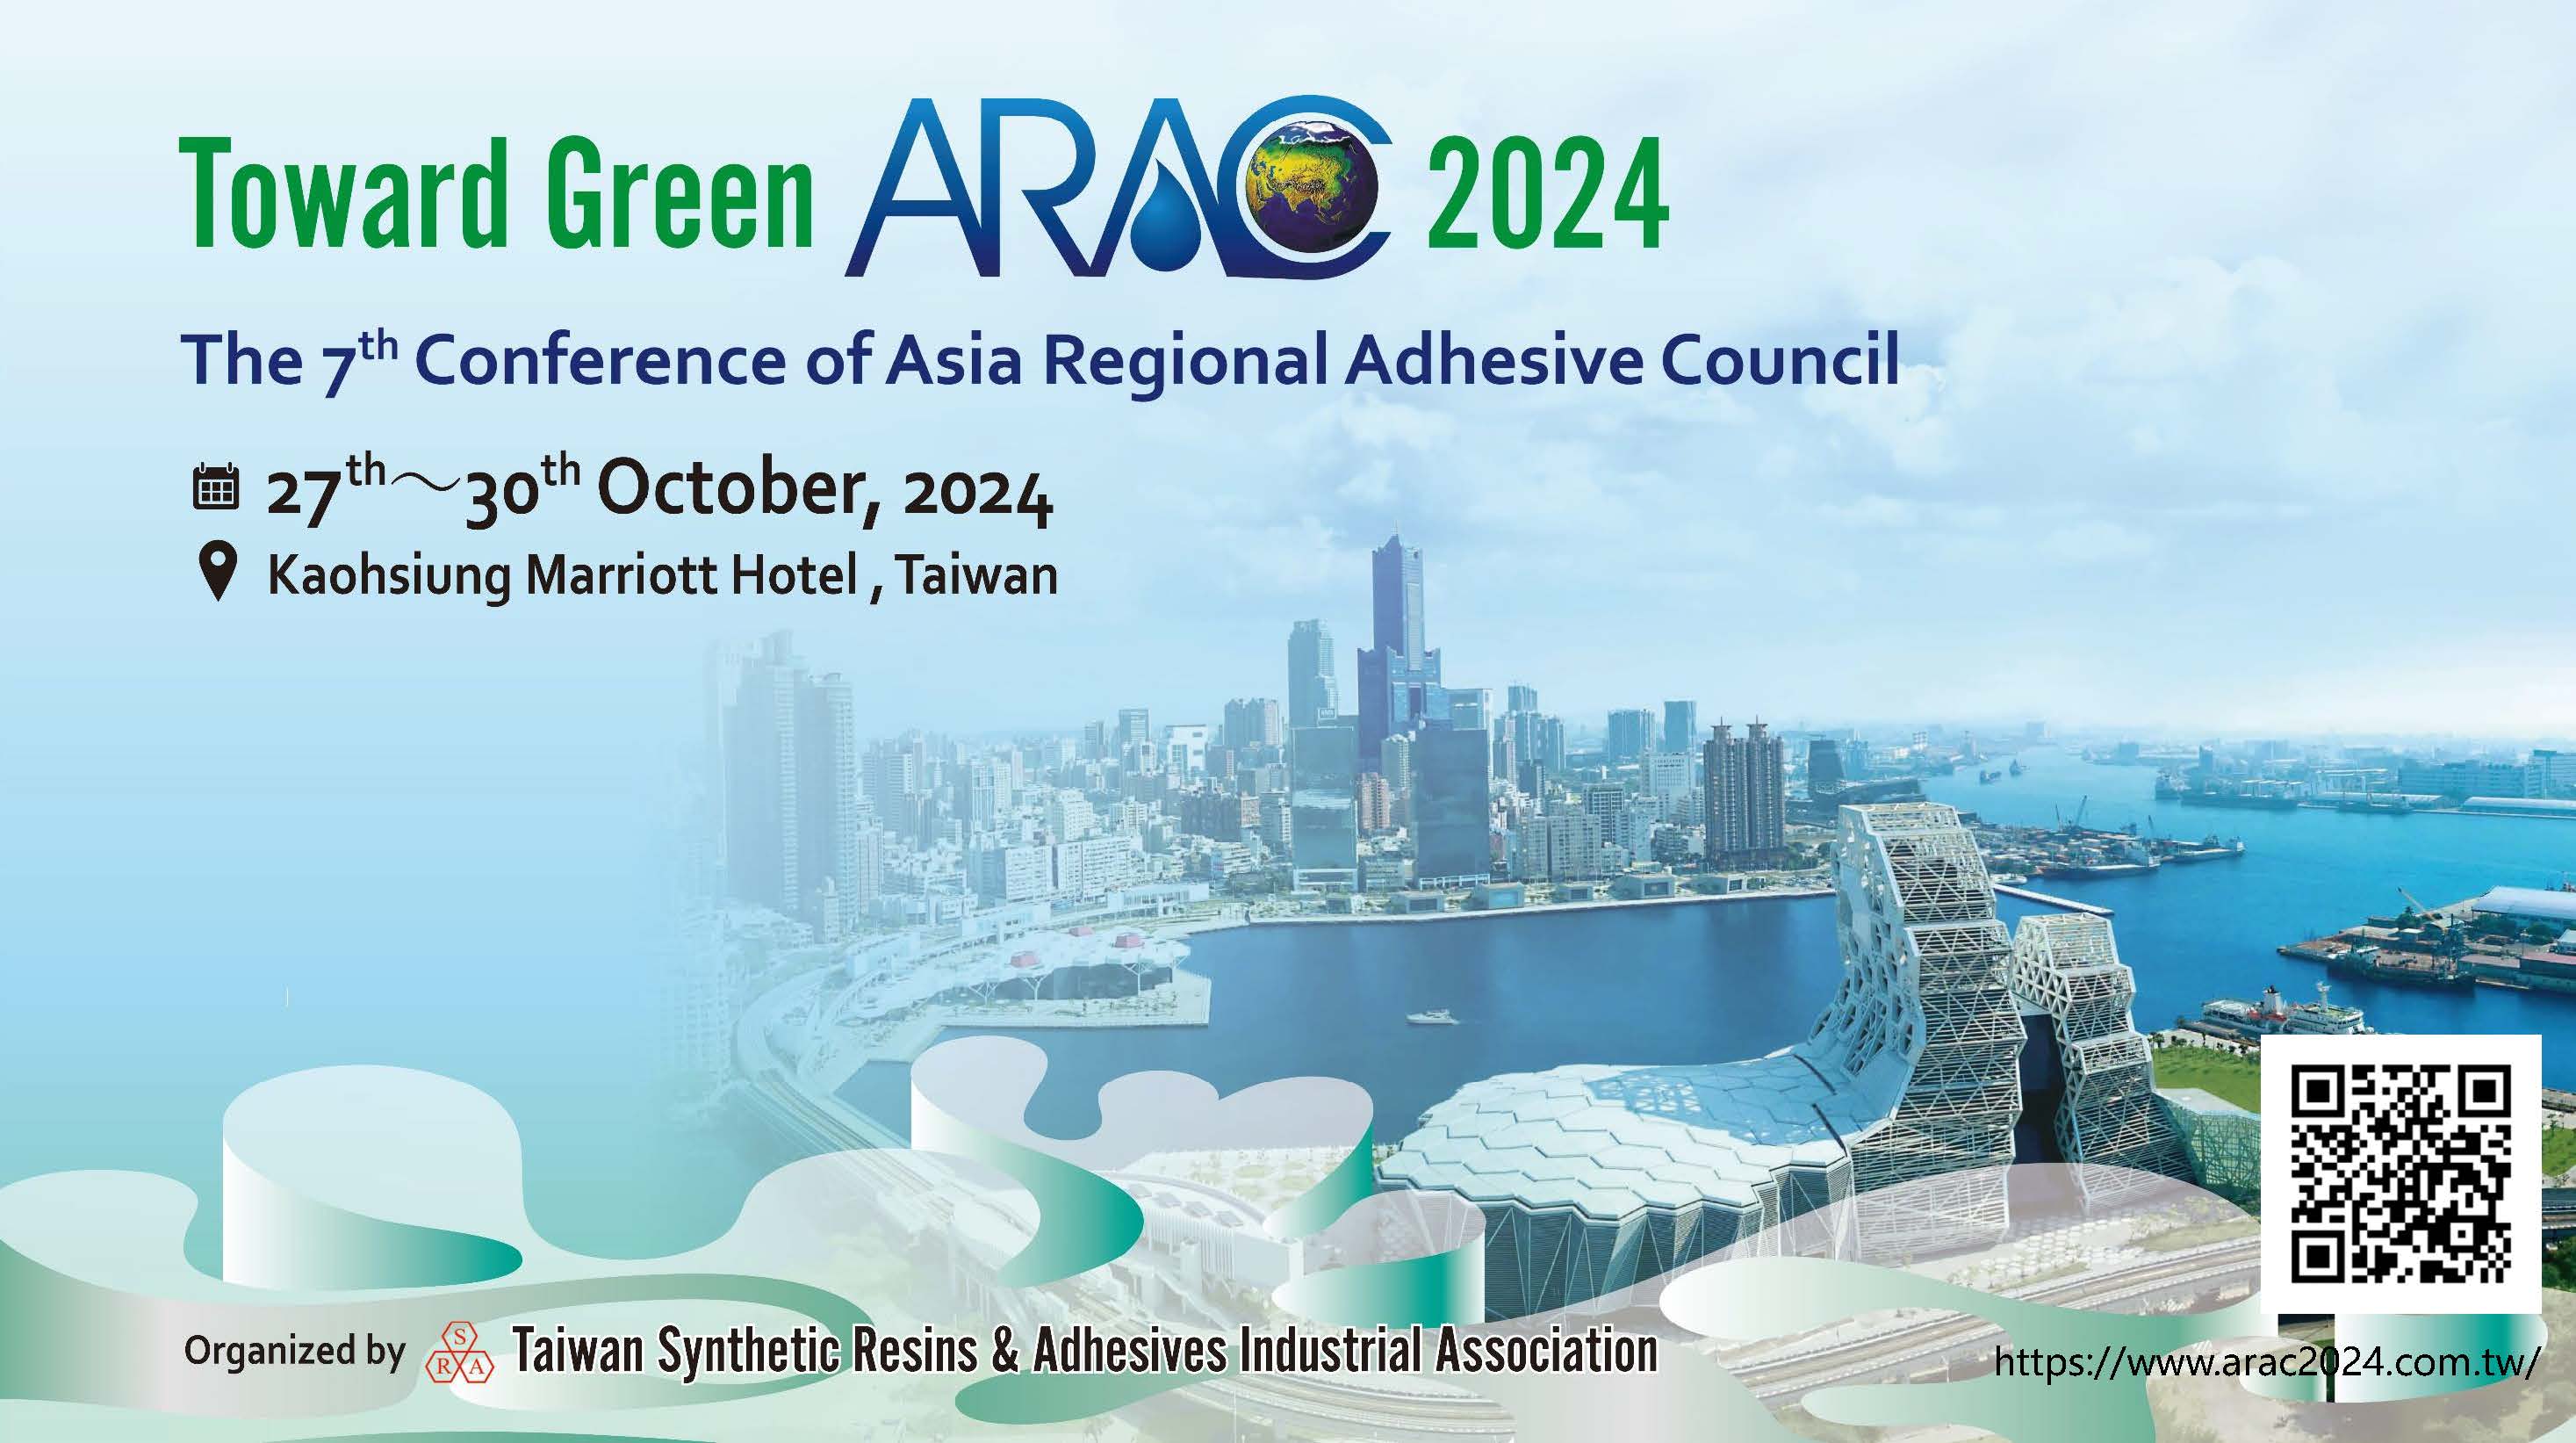 The 7th Conference of Asia Regional Adhesive Counci(ARAC2024)